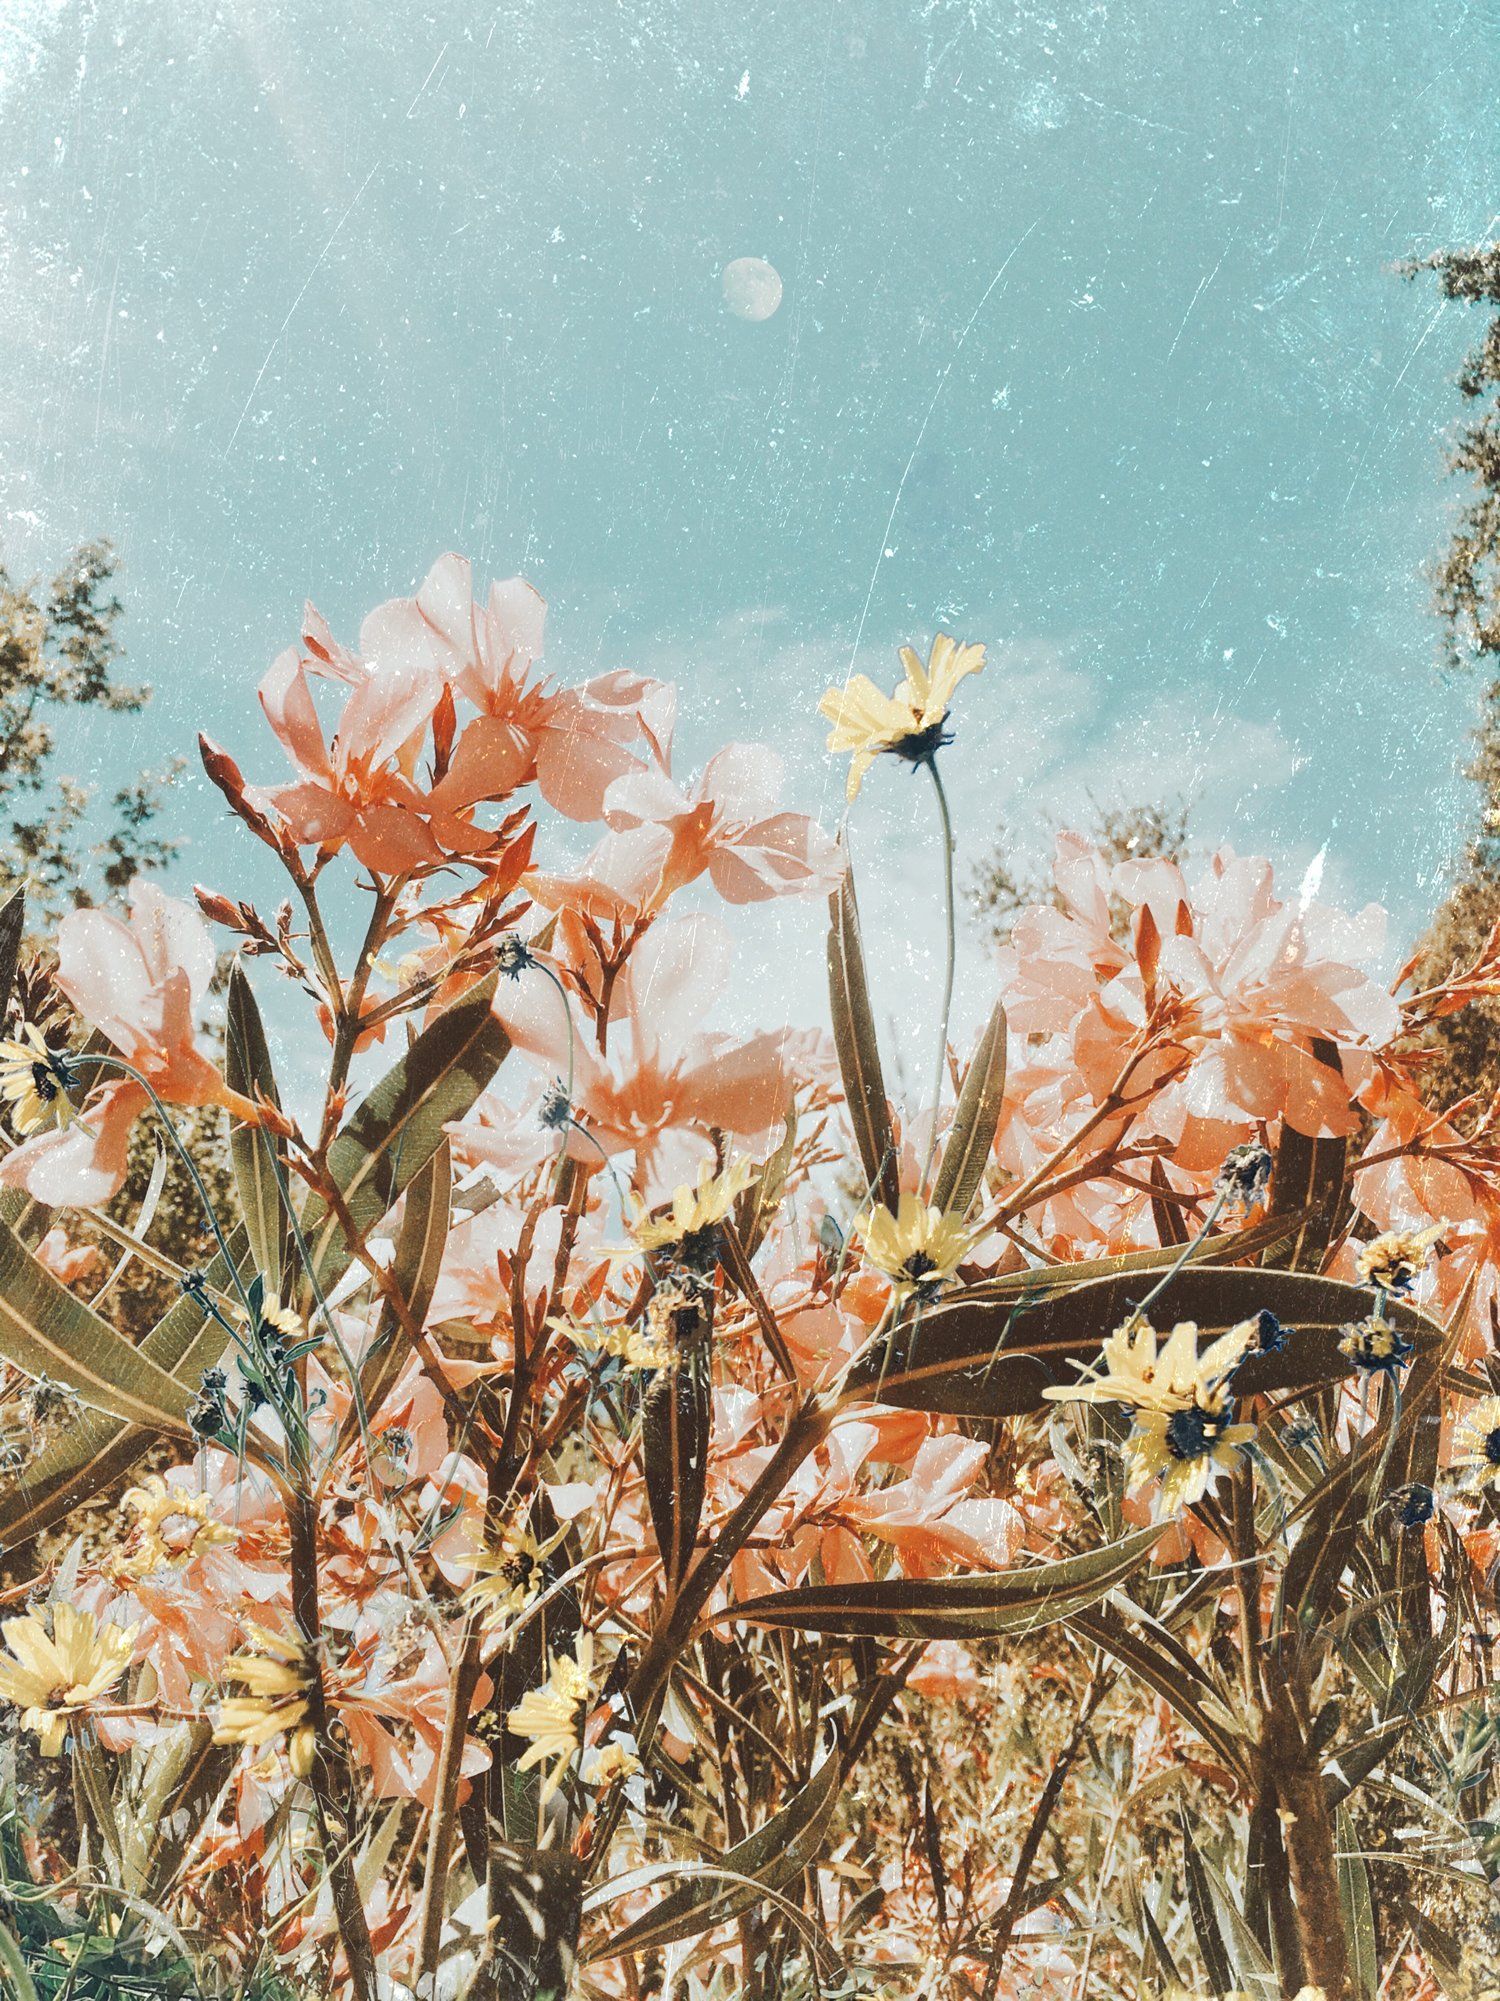 A picture of some flowers in the grass - Boho, art